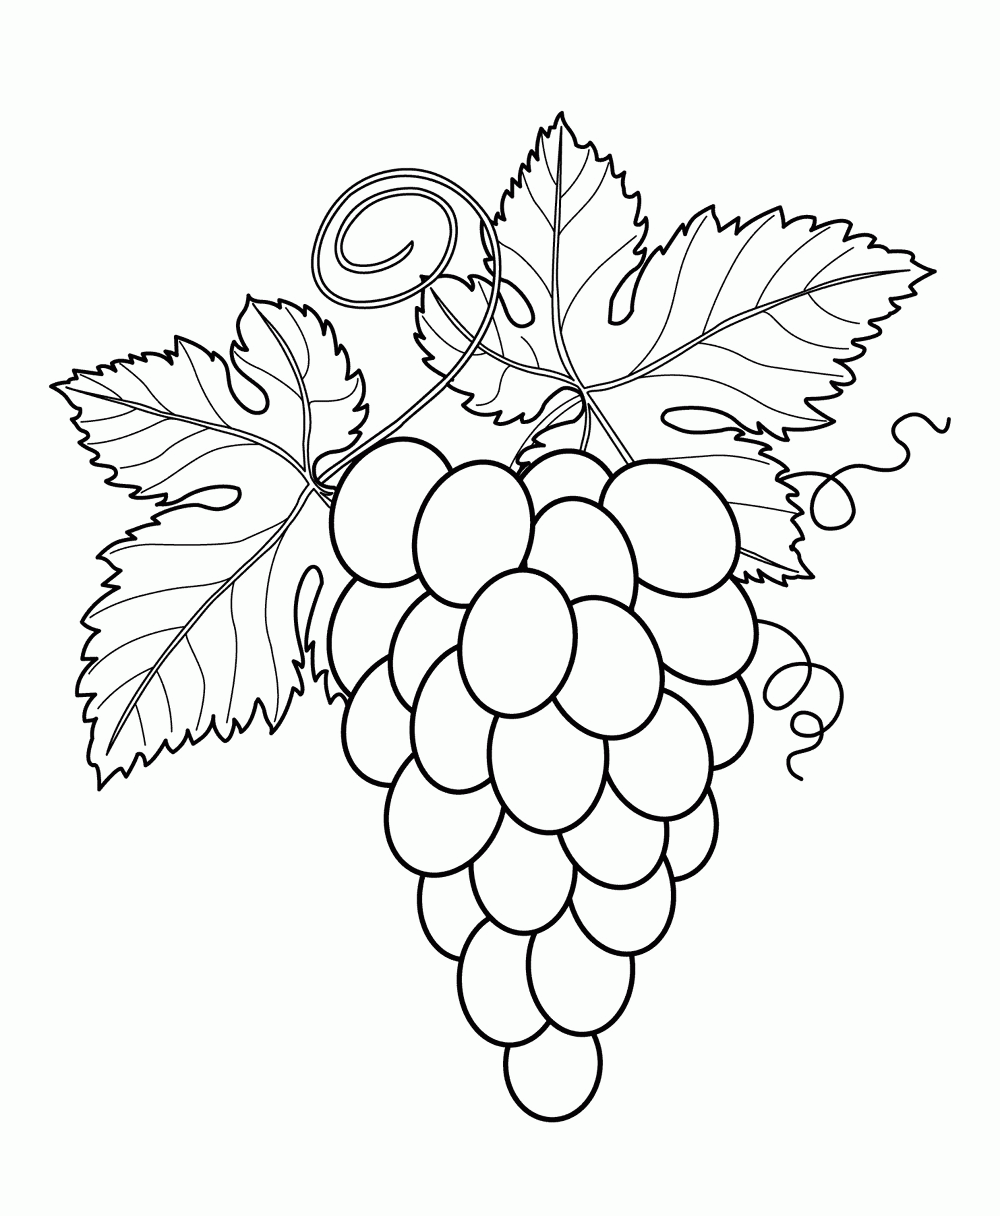 Fruits Coloring Pages Printable